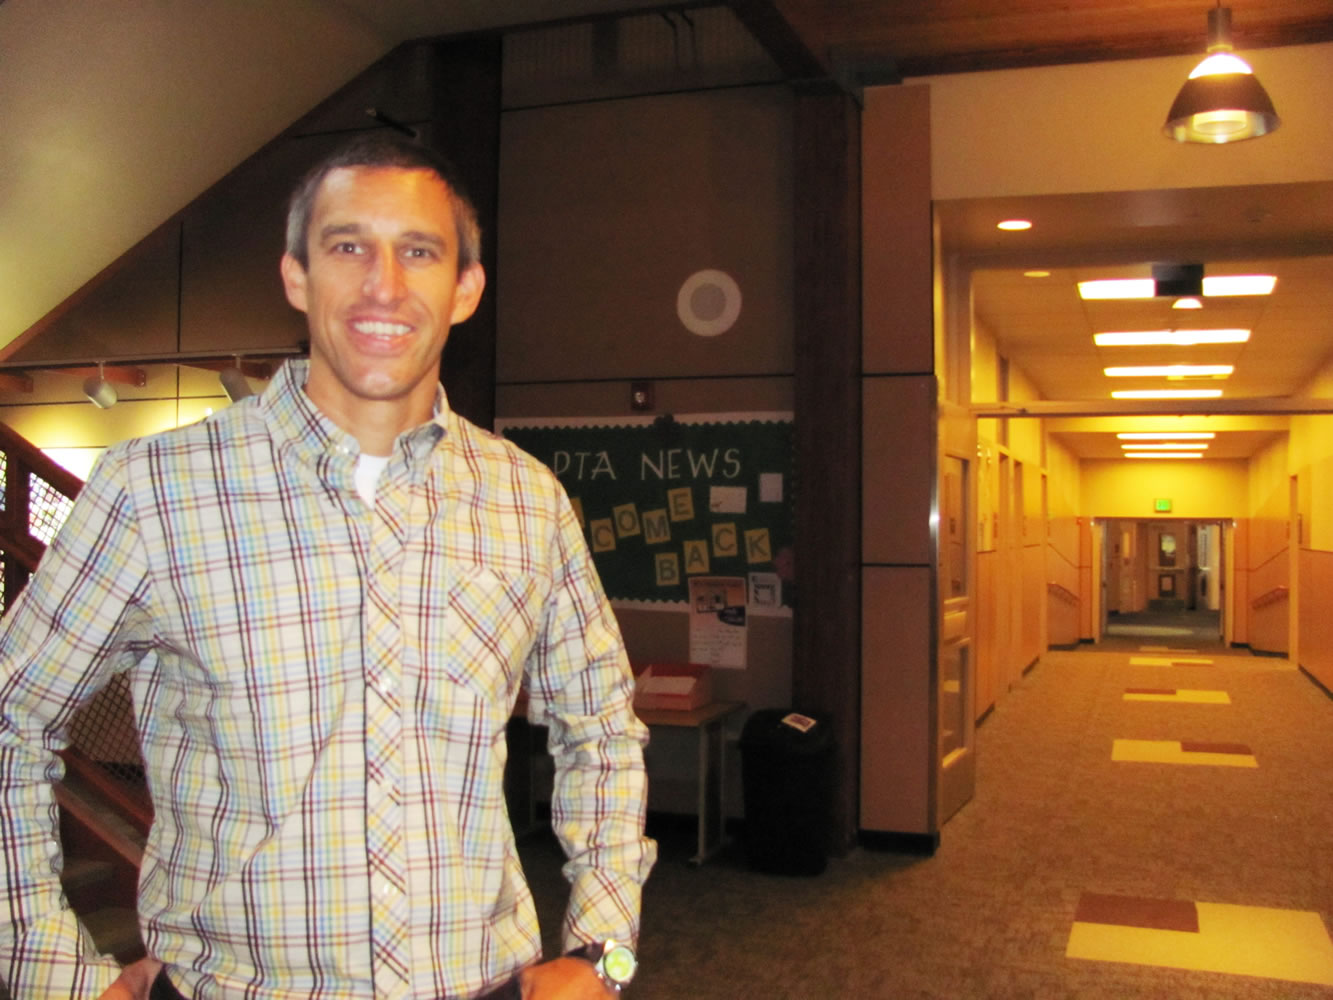 Sean McMillan is the new principal at Grass Valley Elementary School.